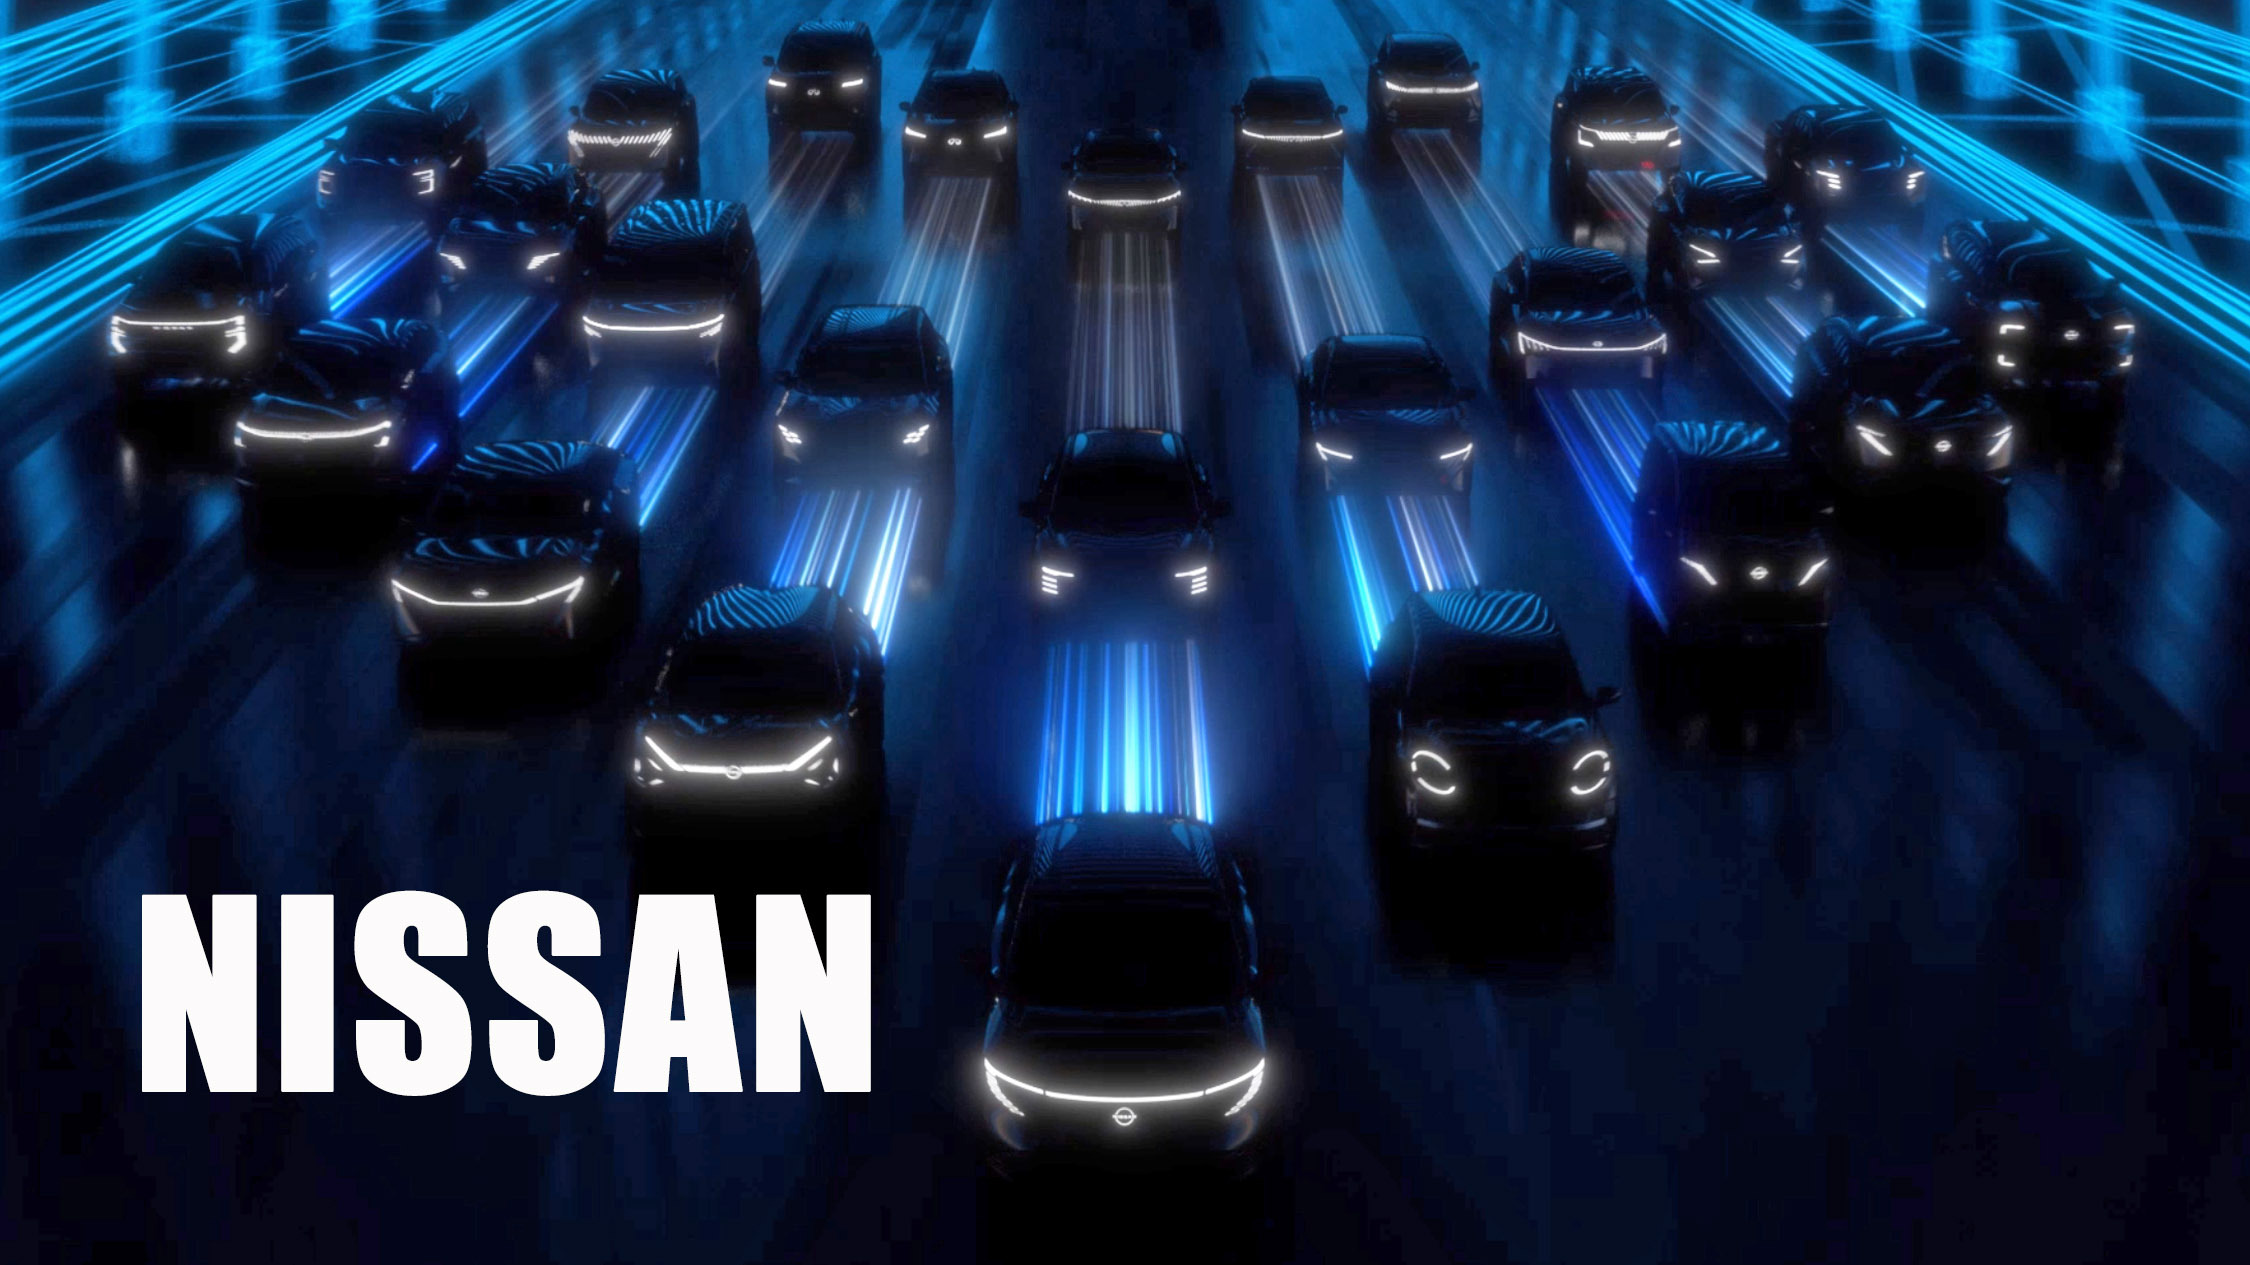 Nissan To Launch 30 New Models By 2026, Including 14 Gas And 16 Electrified Cars [Video]